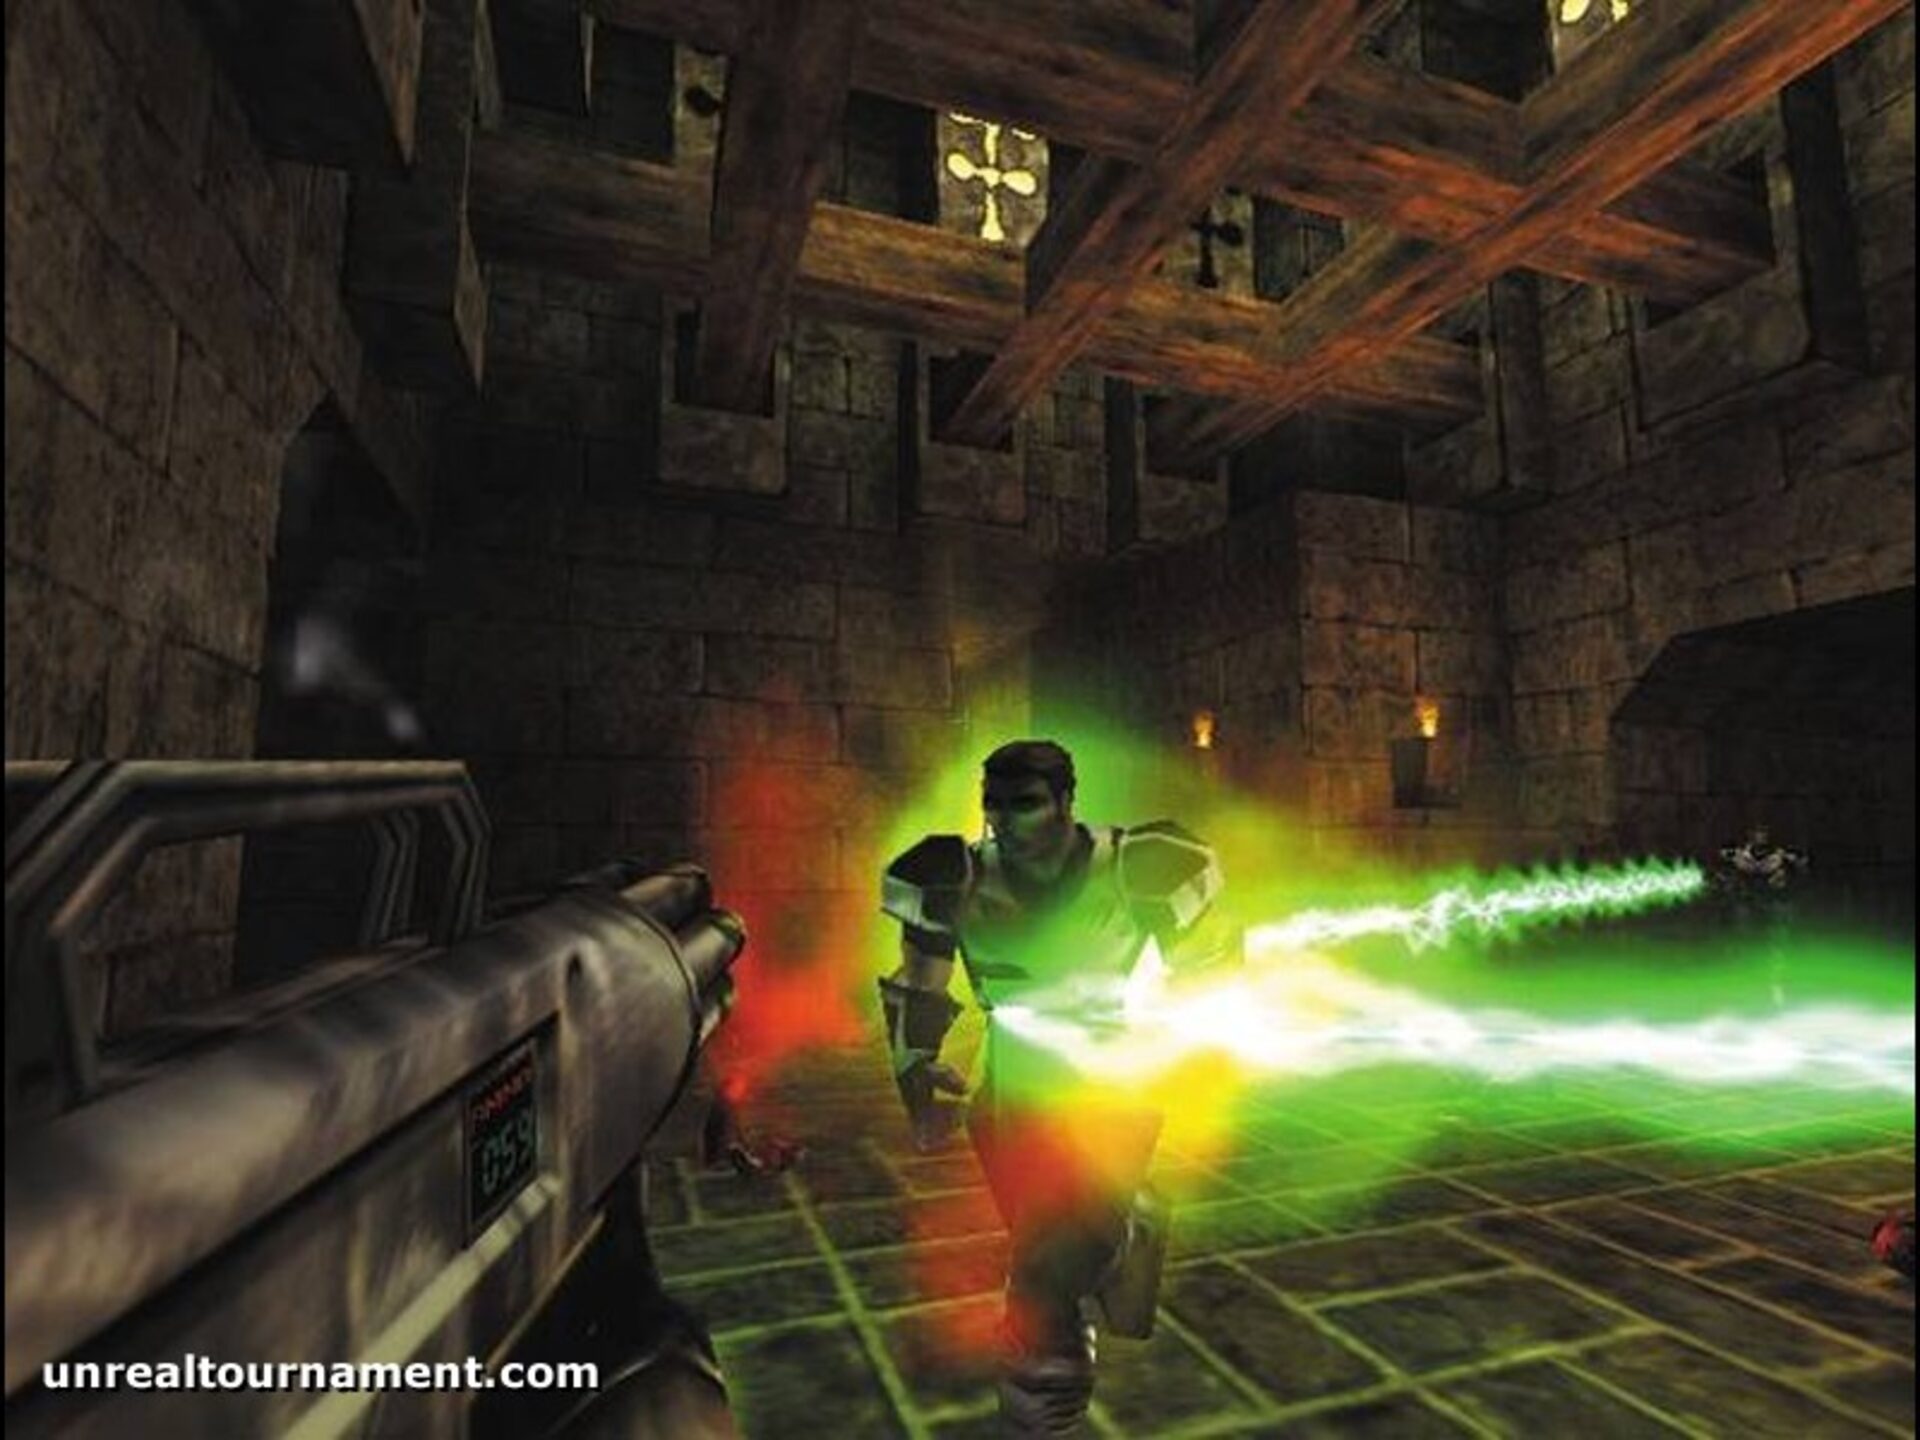 Unreal tournament on steam фото 30